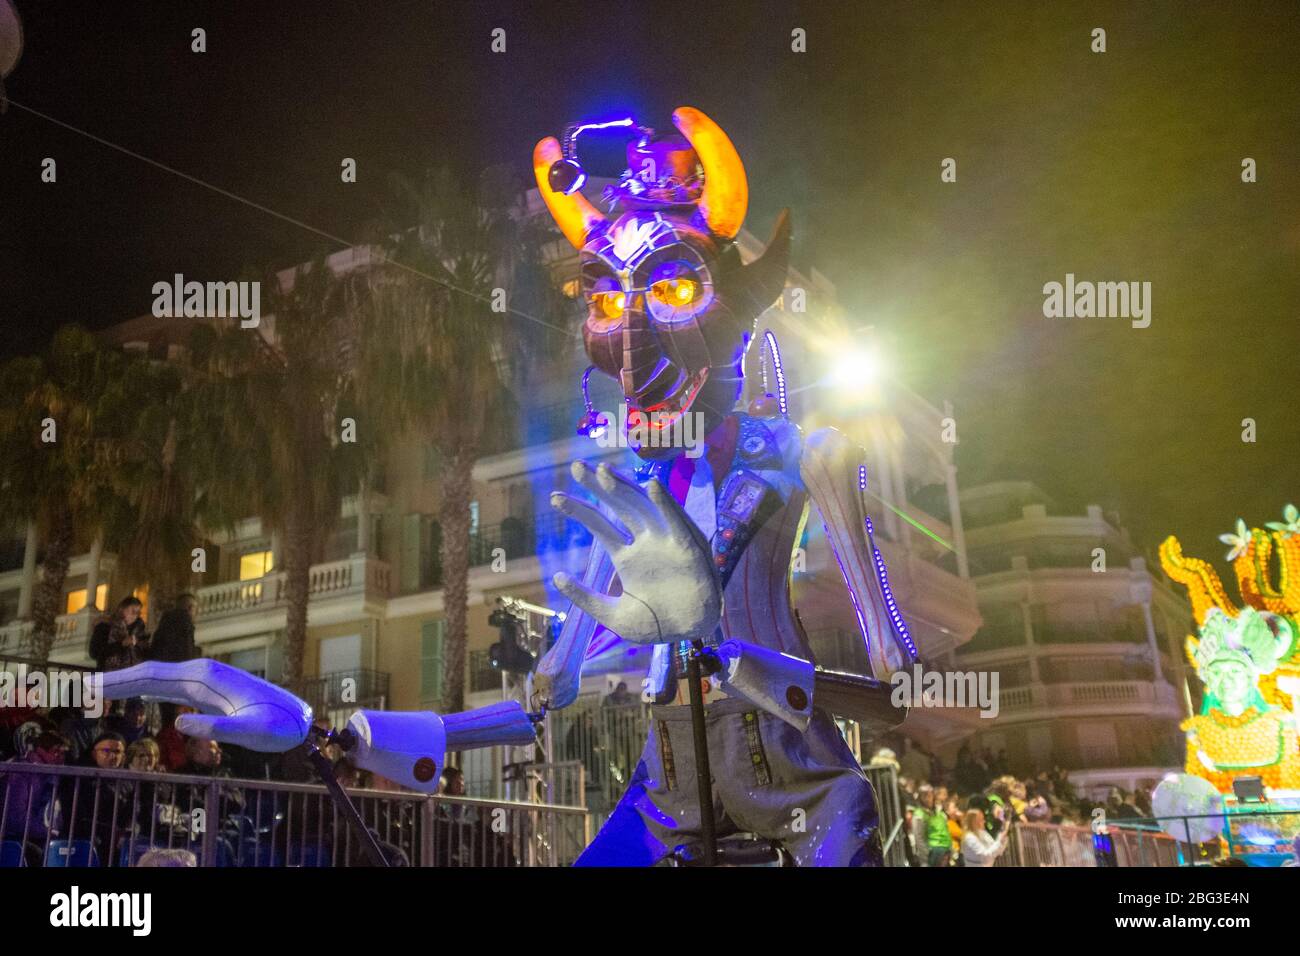 Demon puppet in the night parade of the 87th Fête du Citron (Lemon Festival) in Menton, France. The festival was cancelled due to the outbreak of novel coronavirus disease (COVID-19) Stock Photo